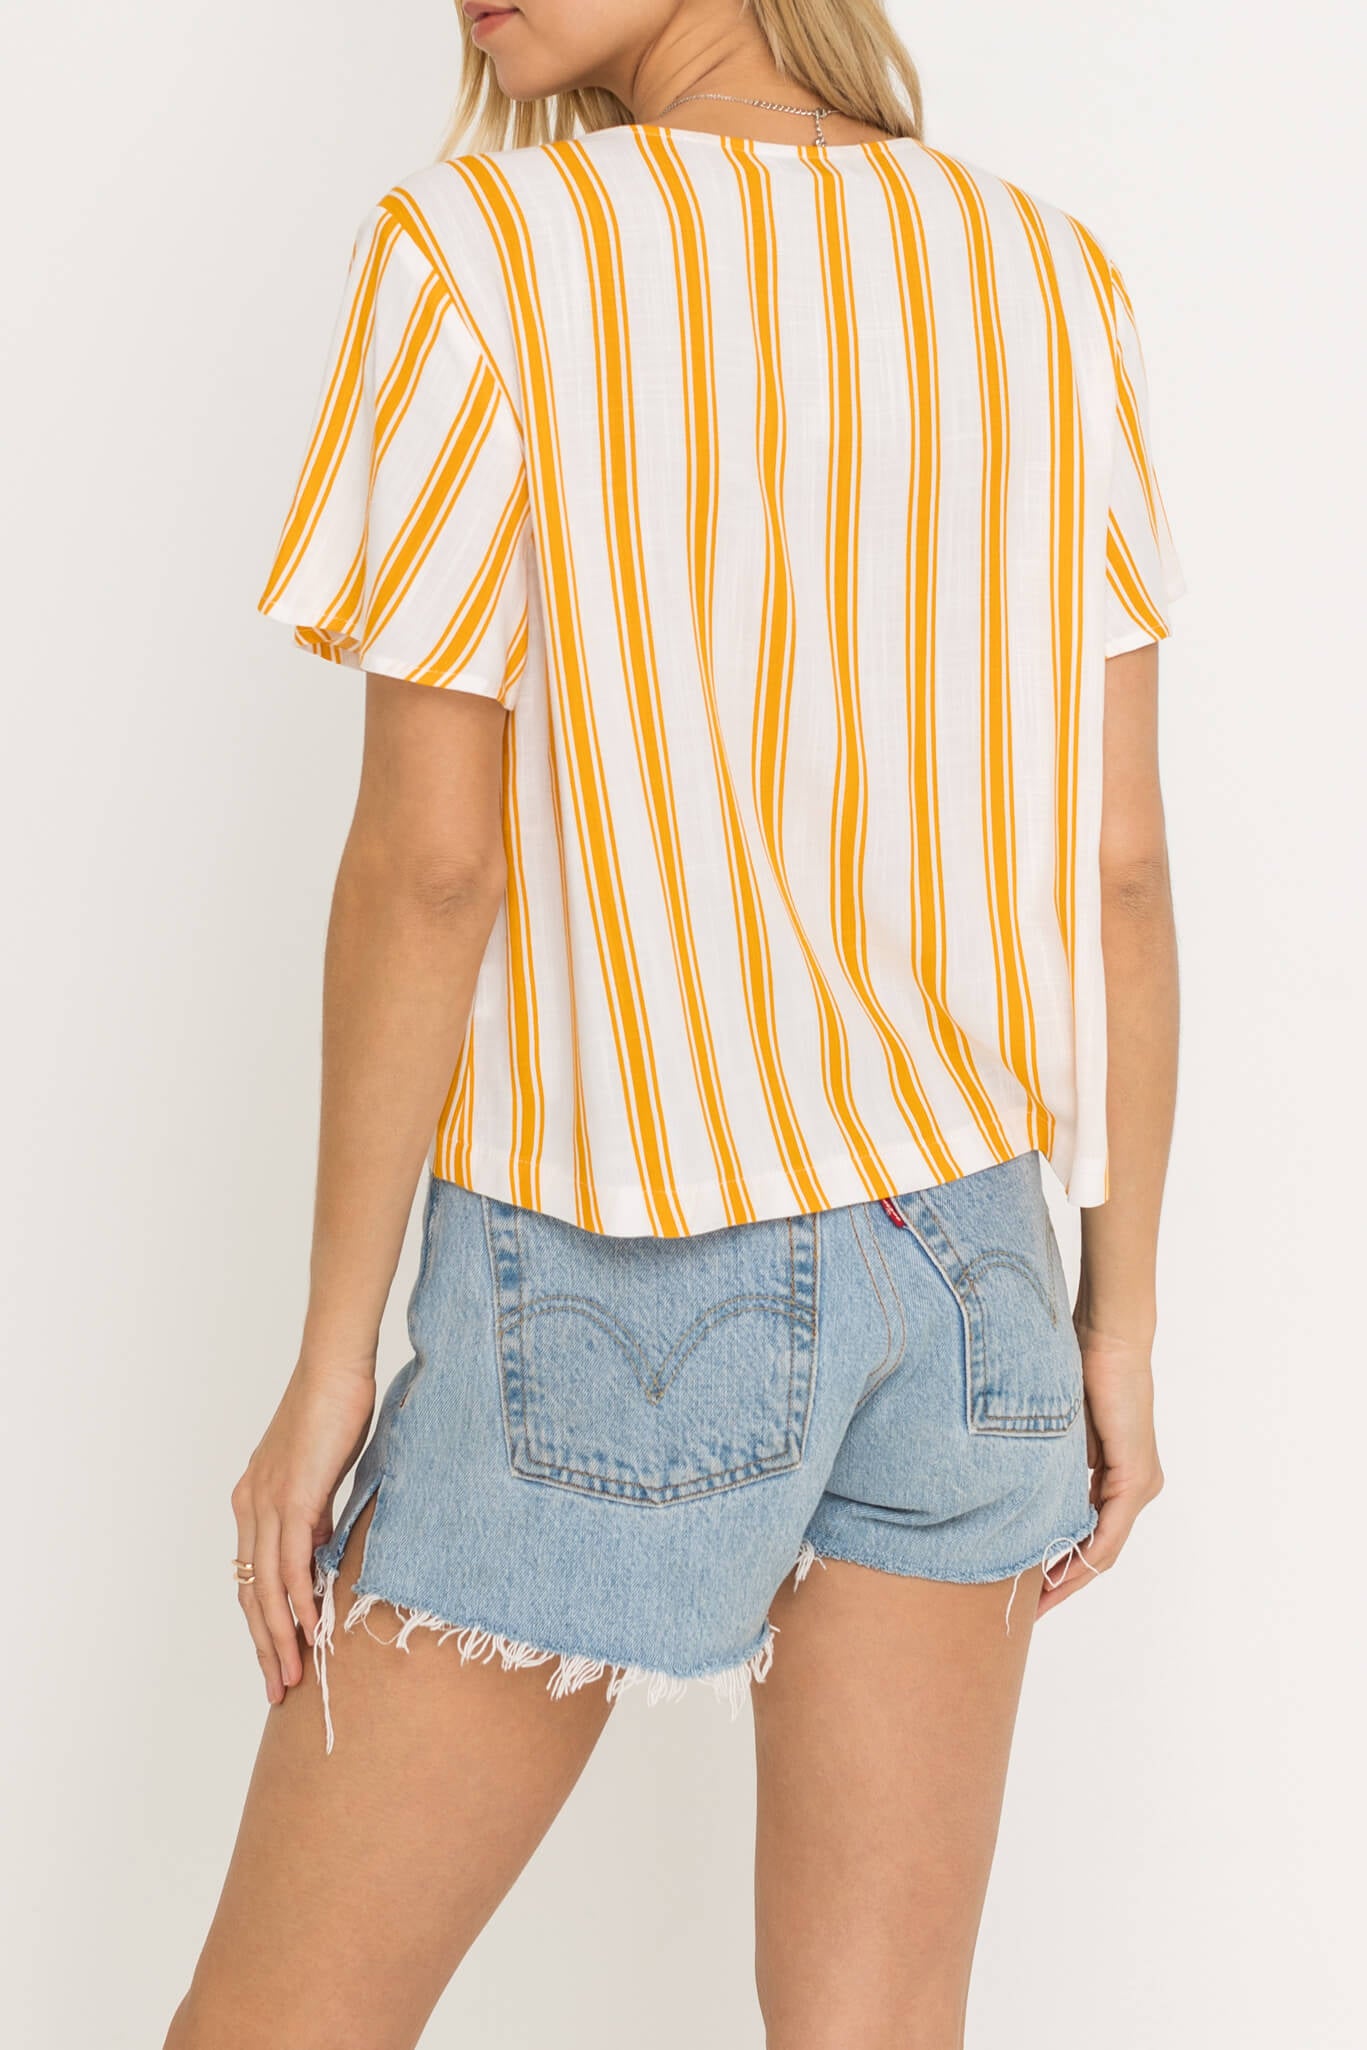 Gold Striped Button Down Top